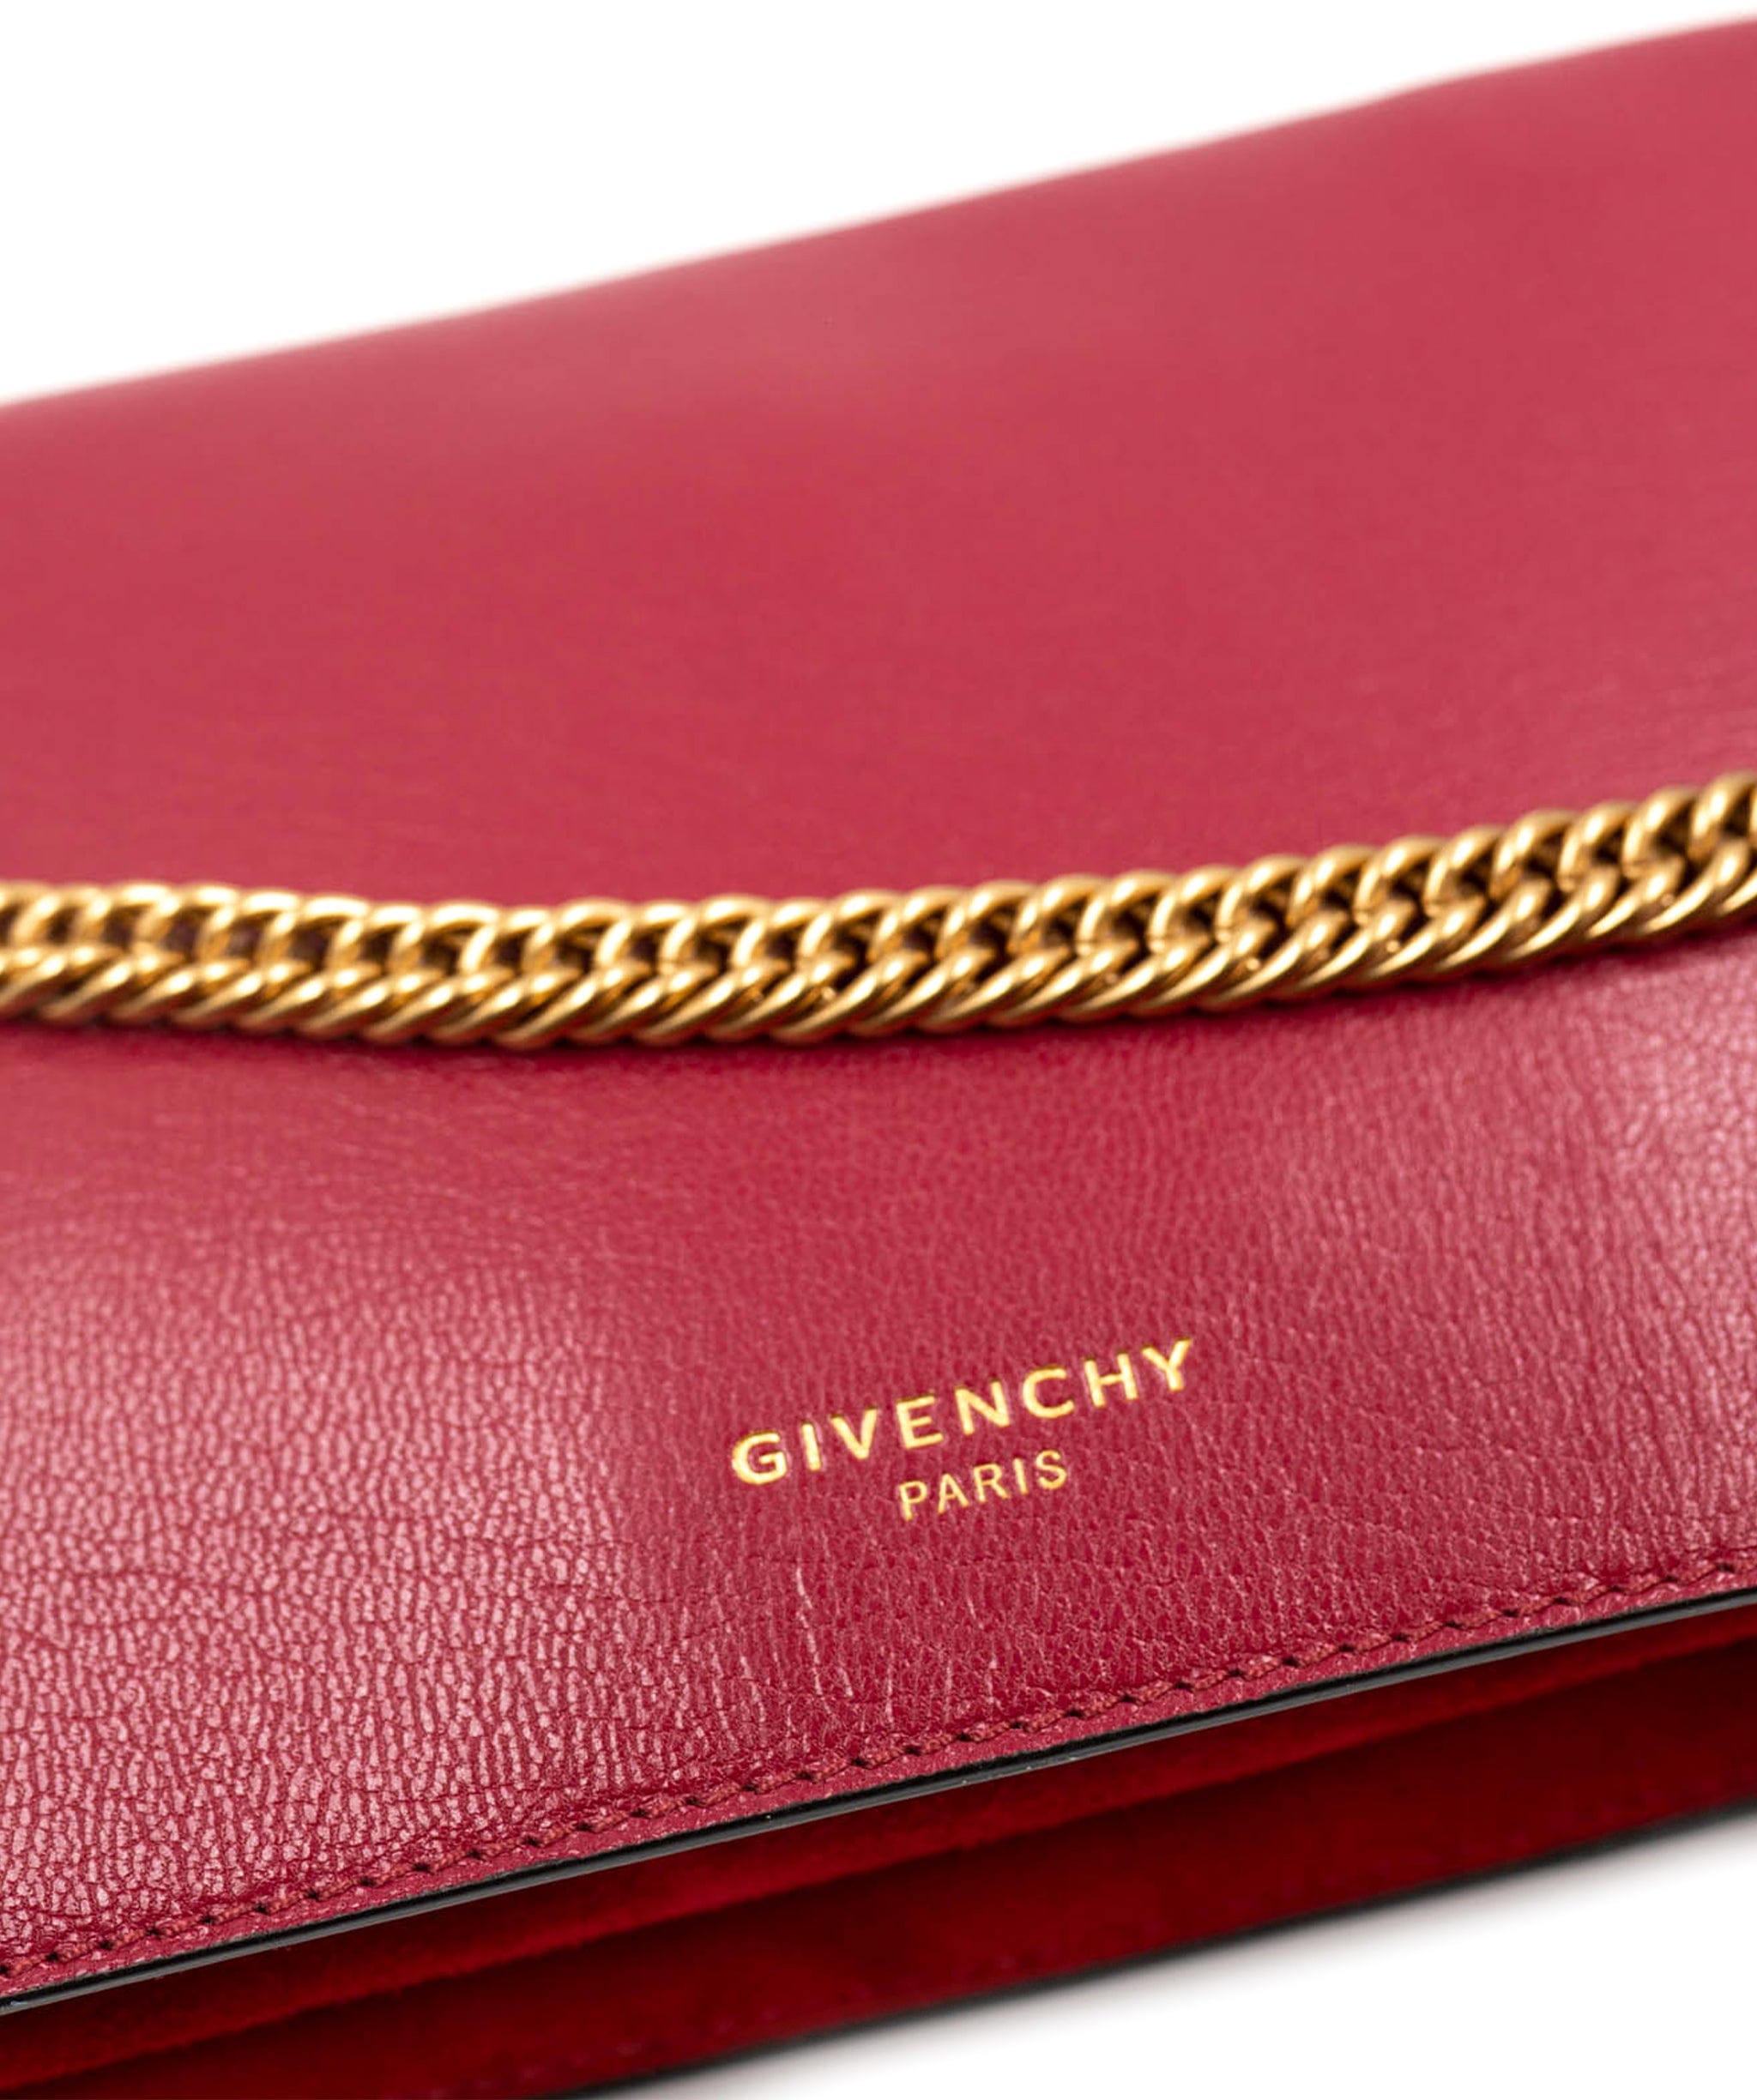 Givenchy Givenchy Red Cross Body Bag - ASL2043